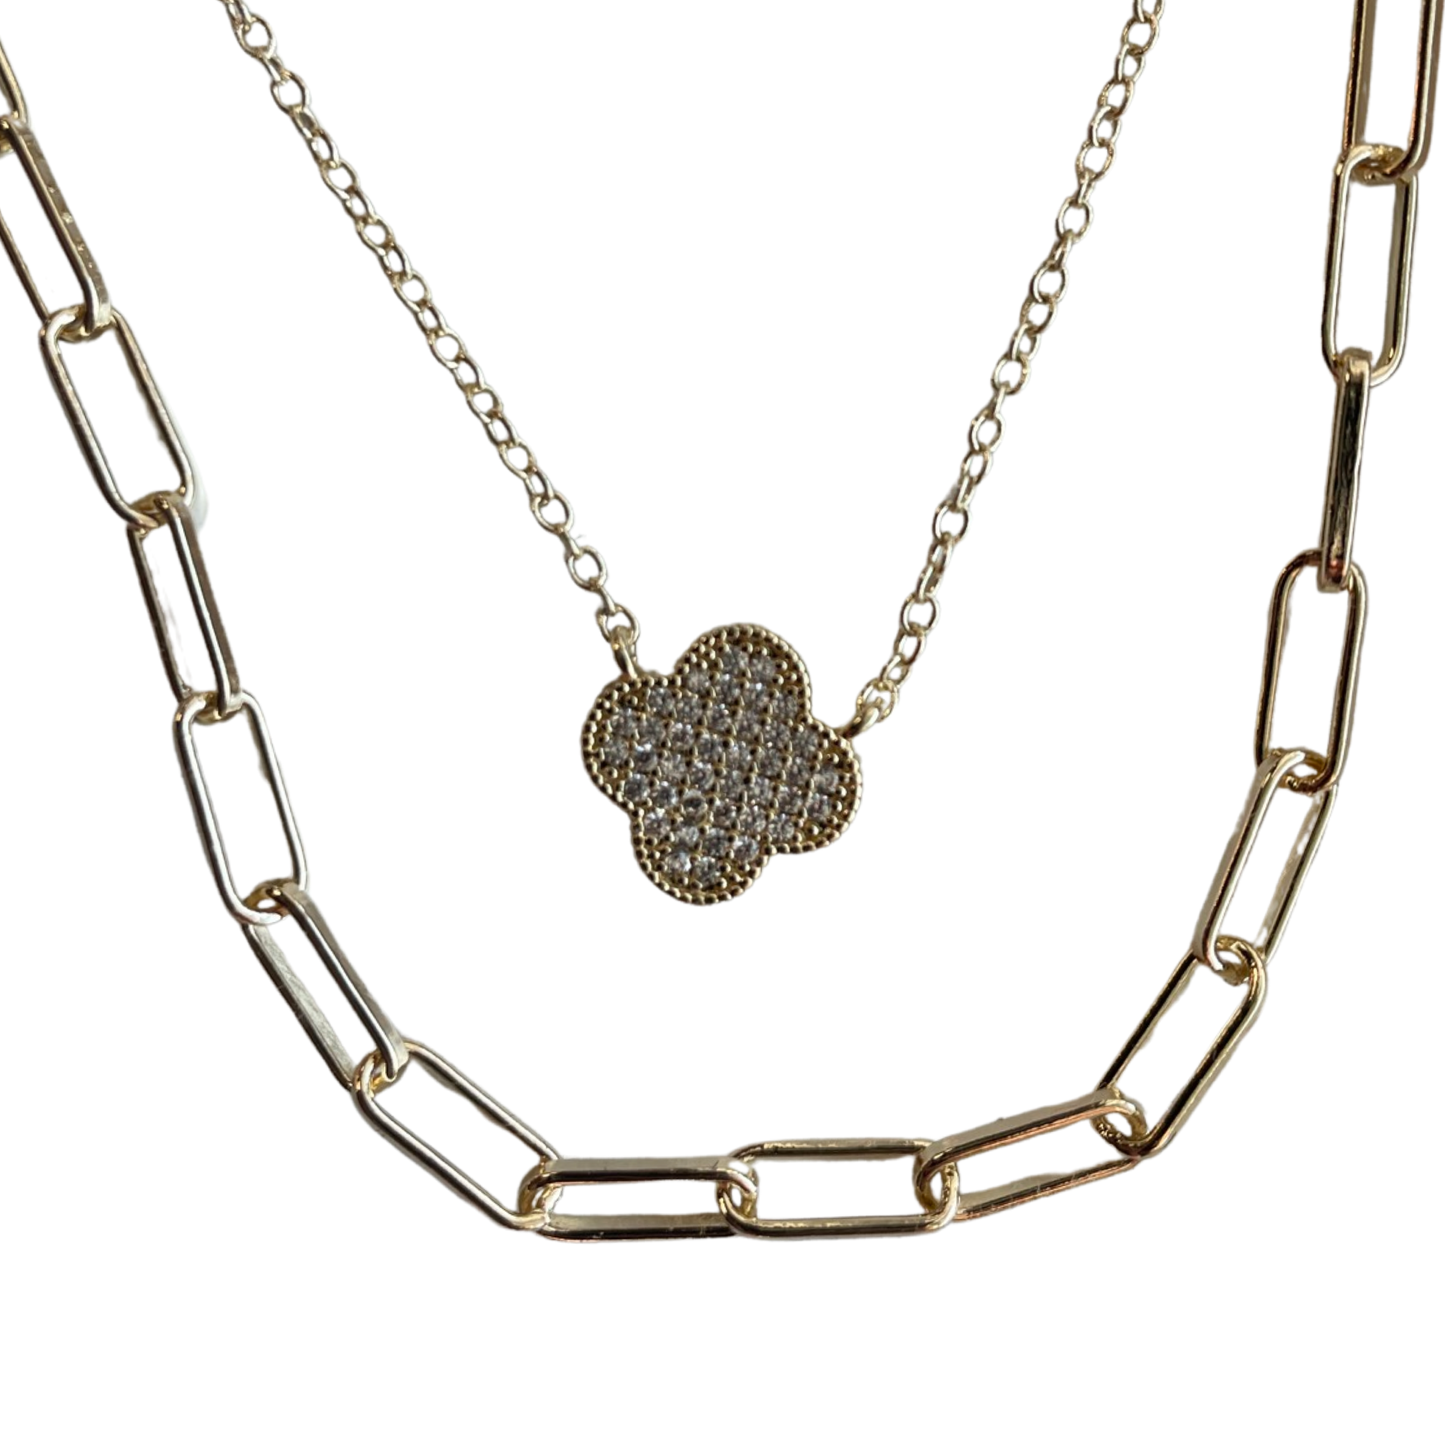 Gold Paperclip Necklace with Clover Pendant Layer